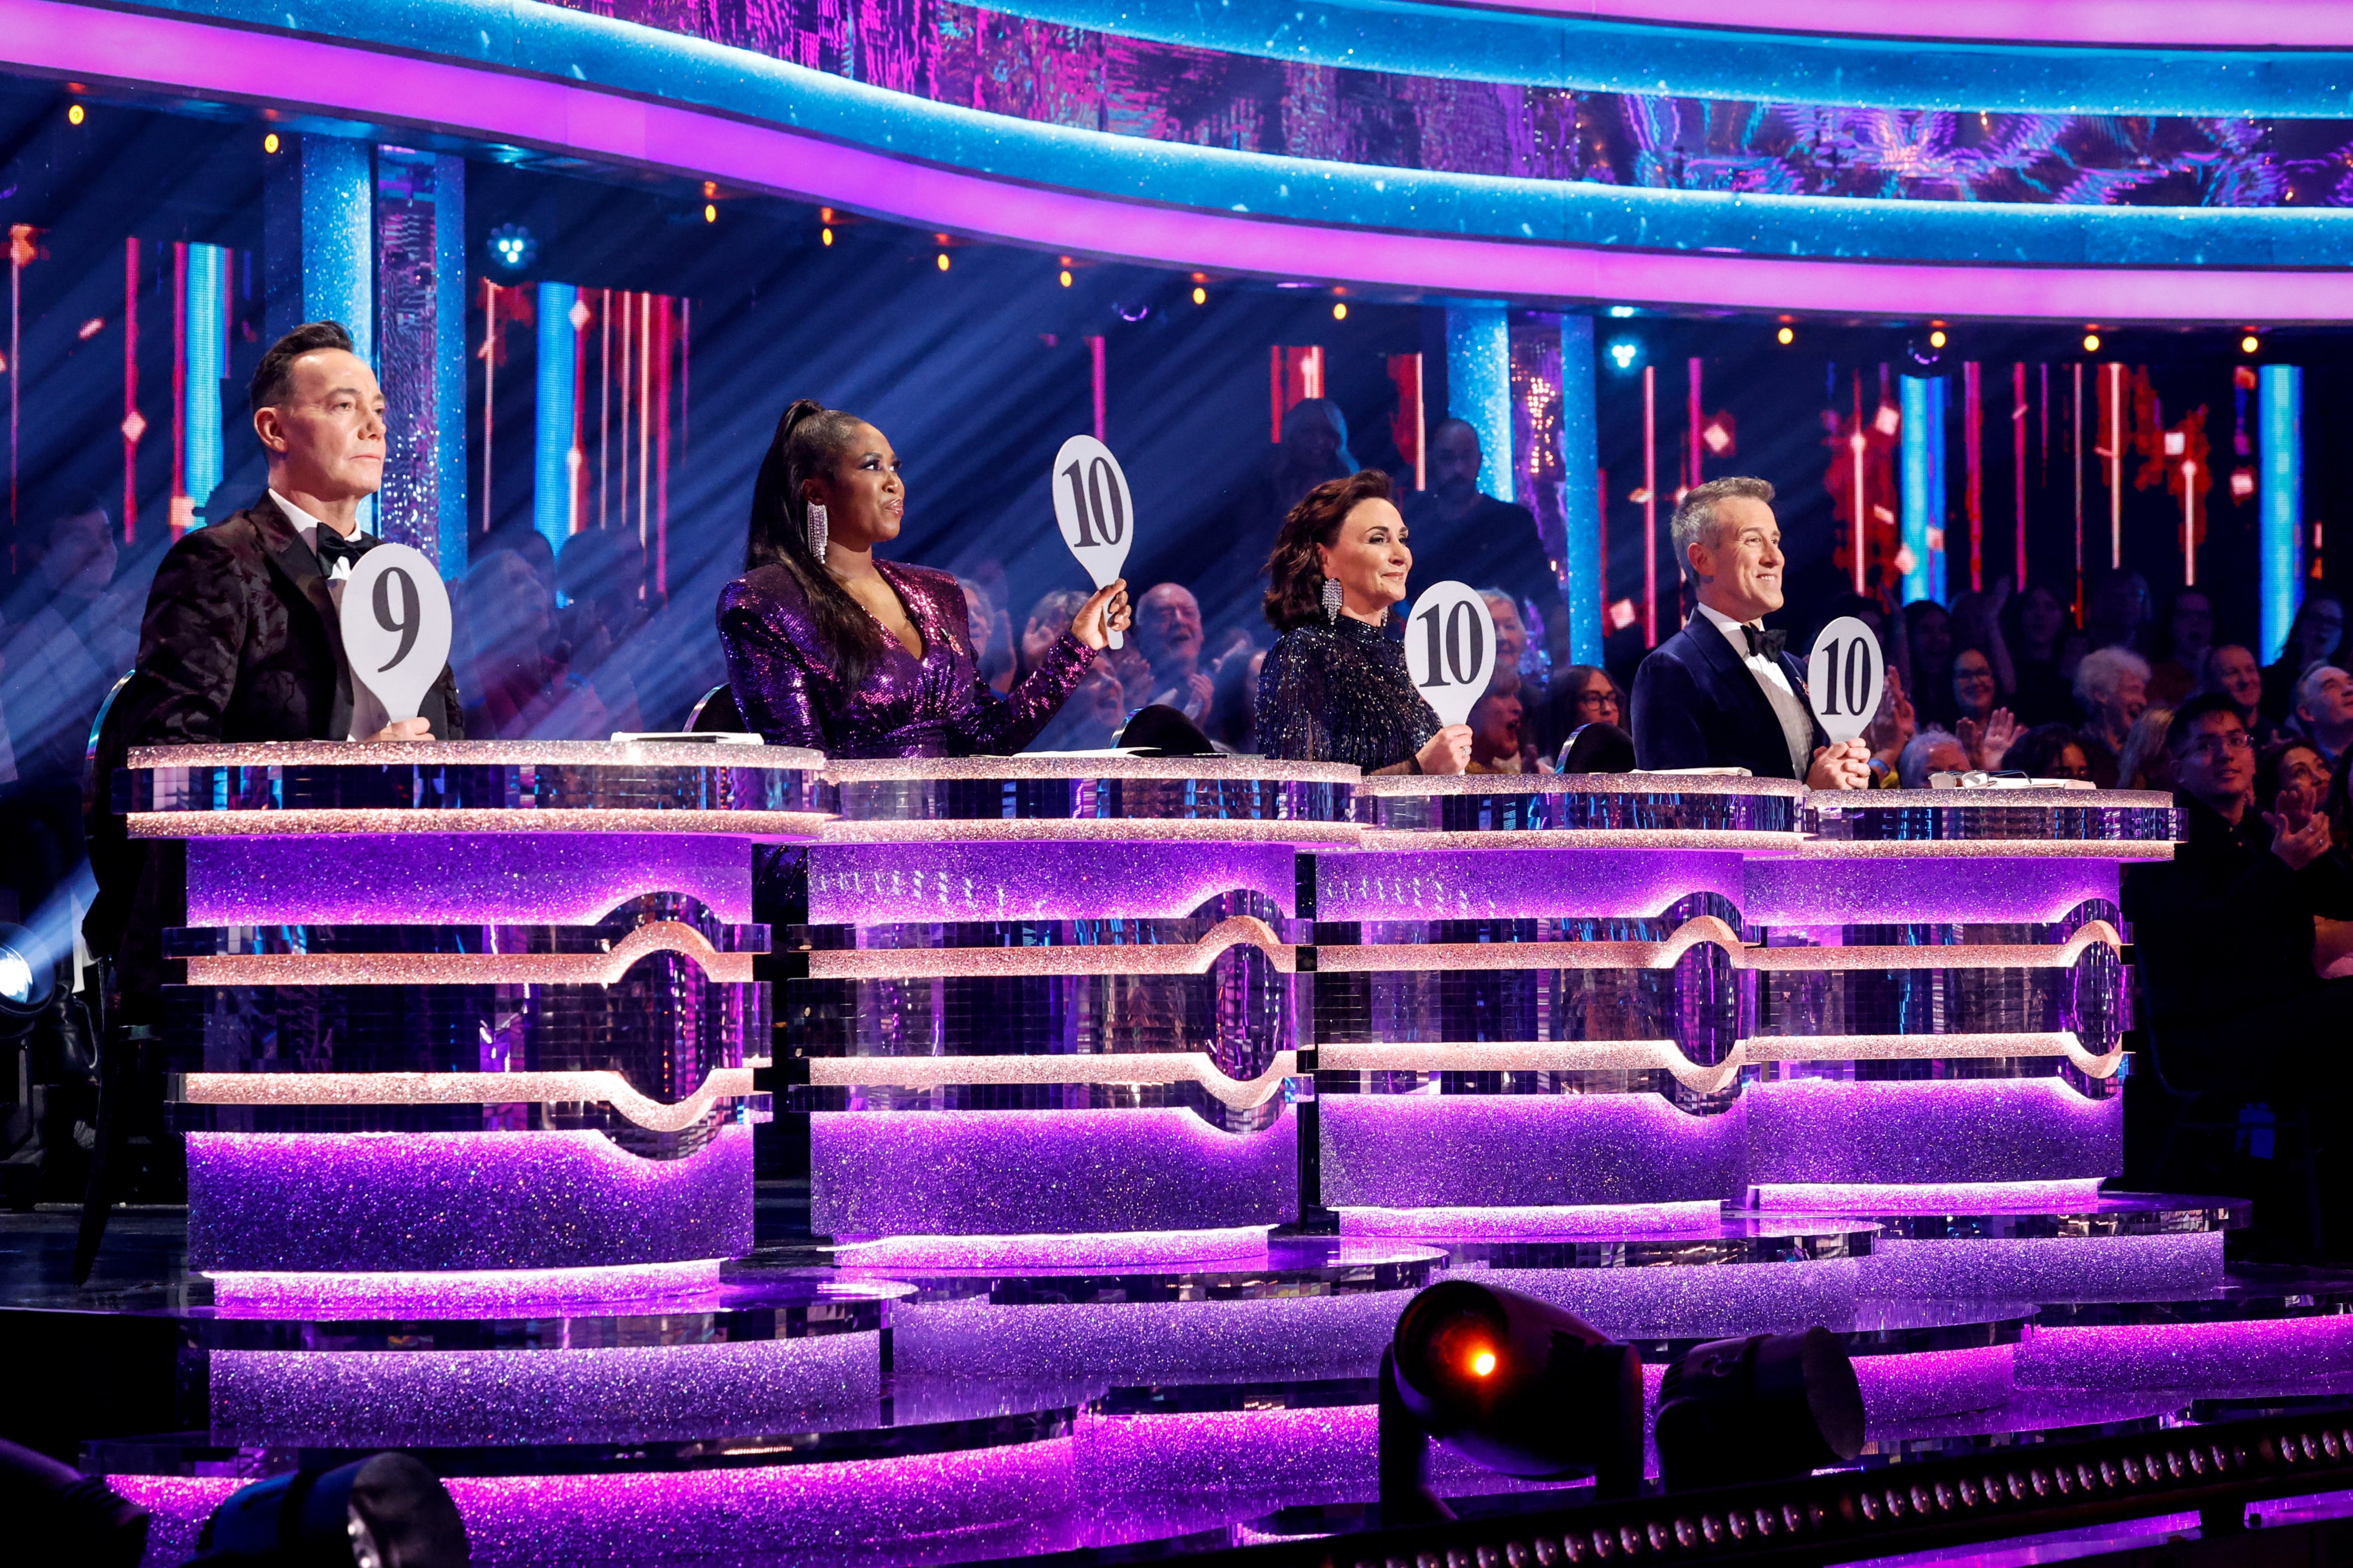 Strictly Come Dancing judges share their votes during the show